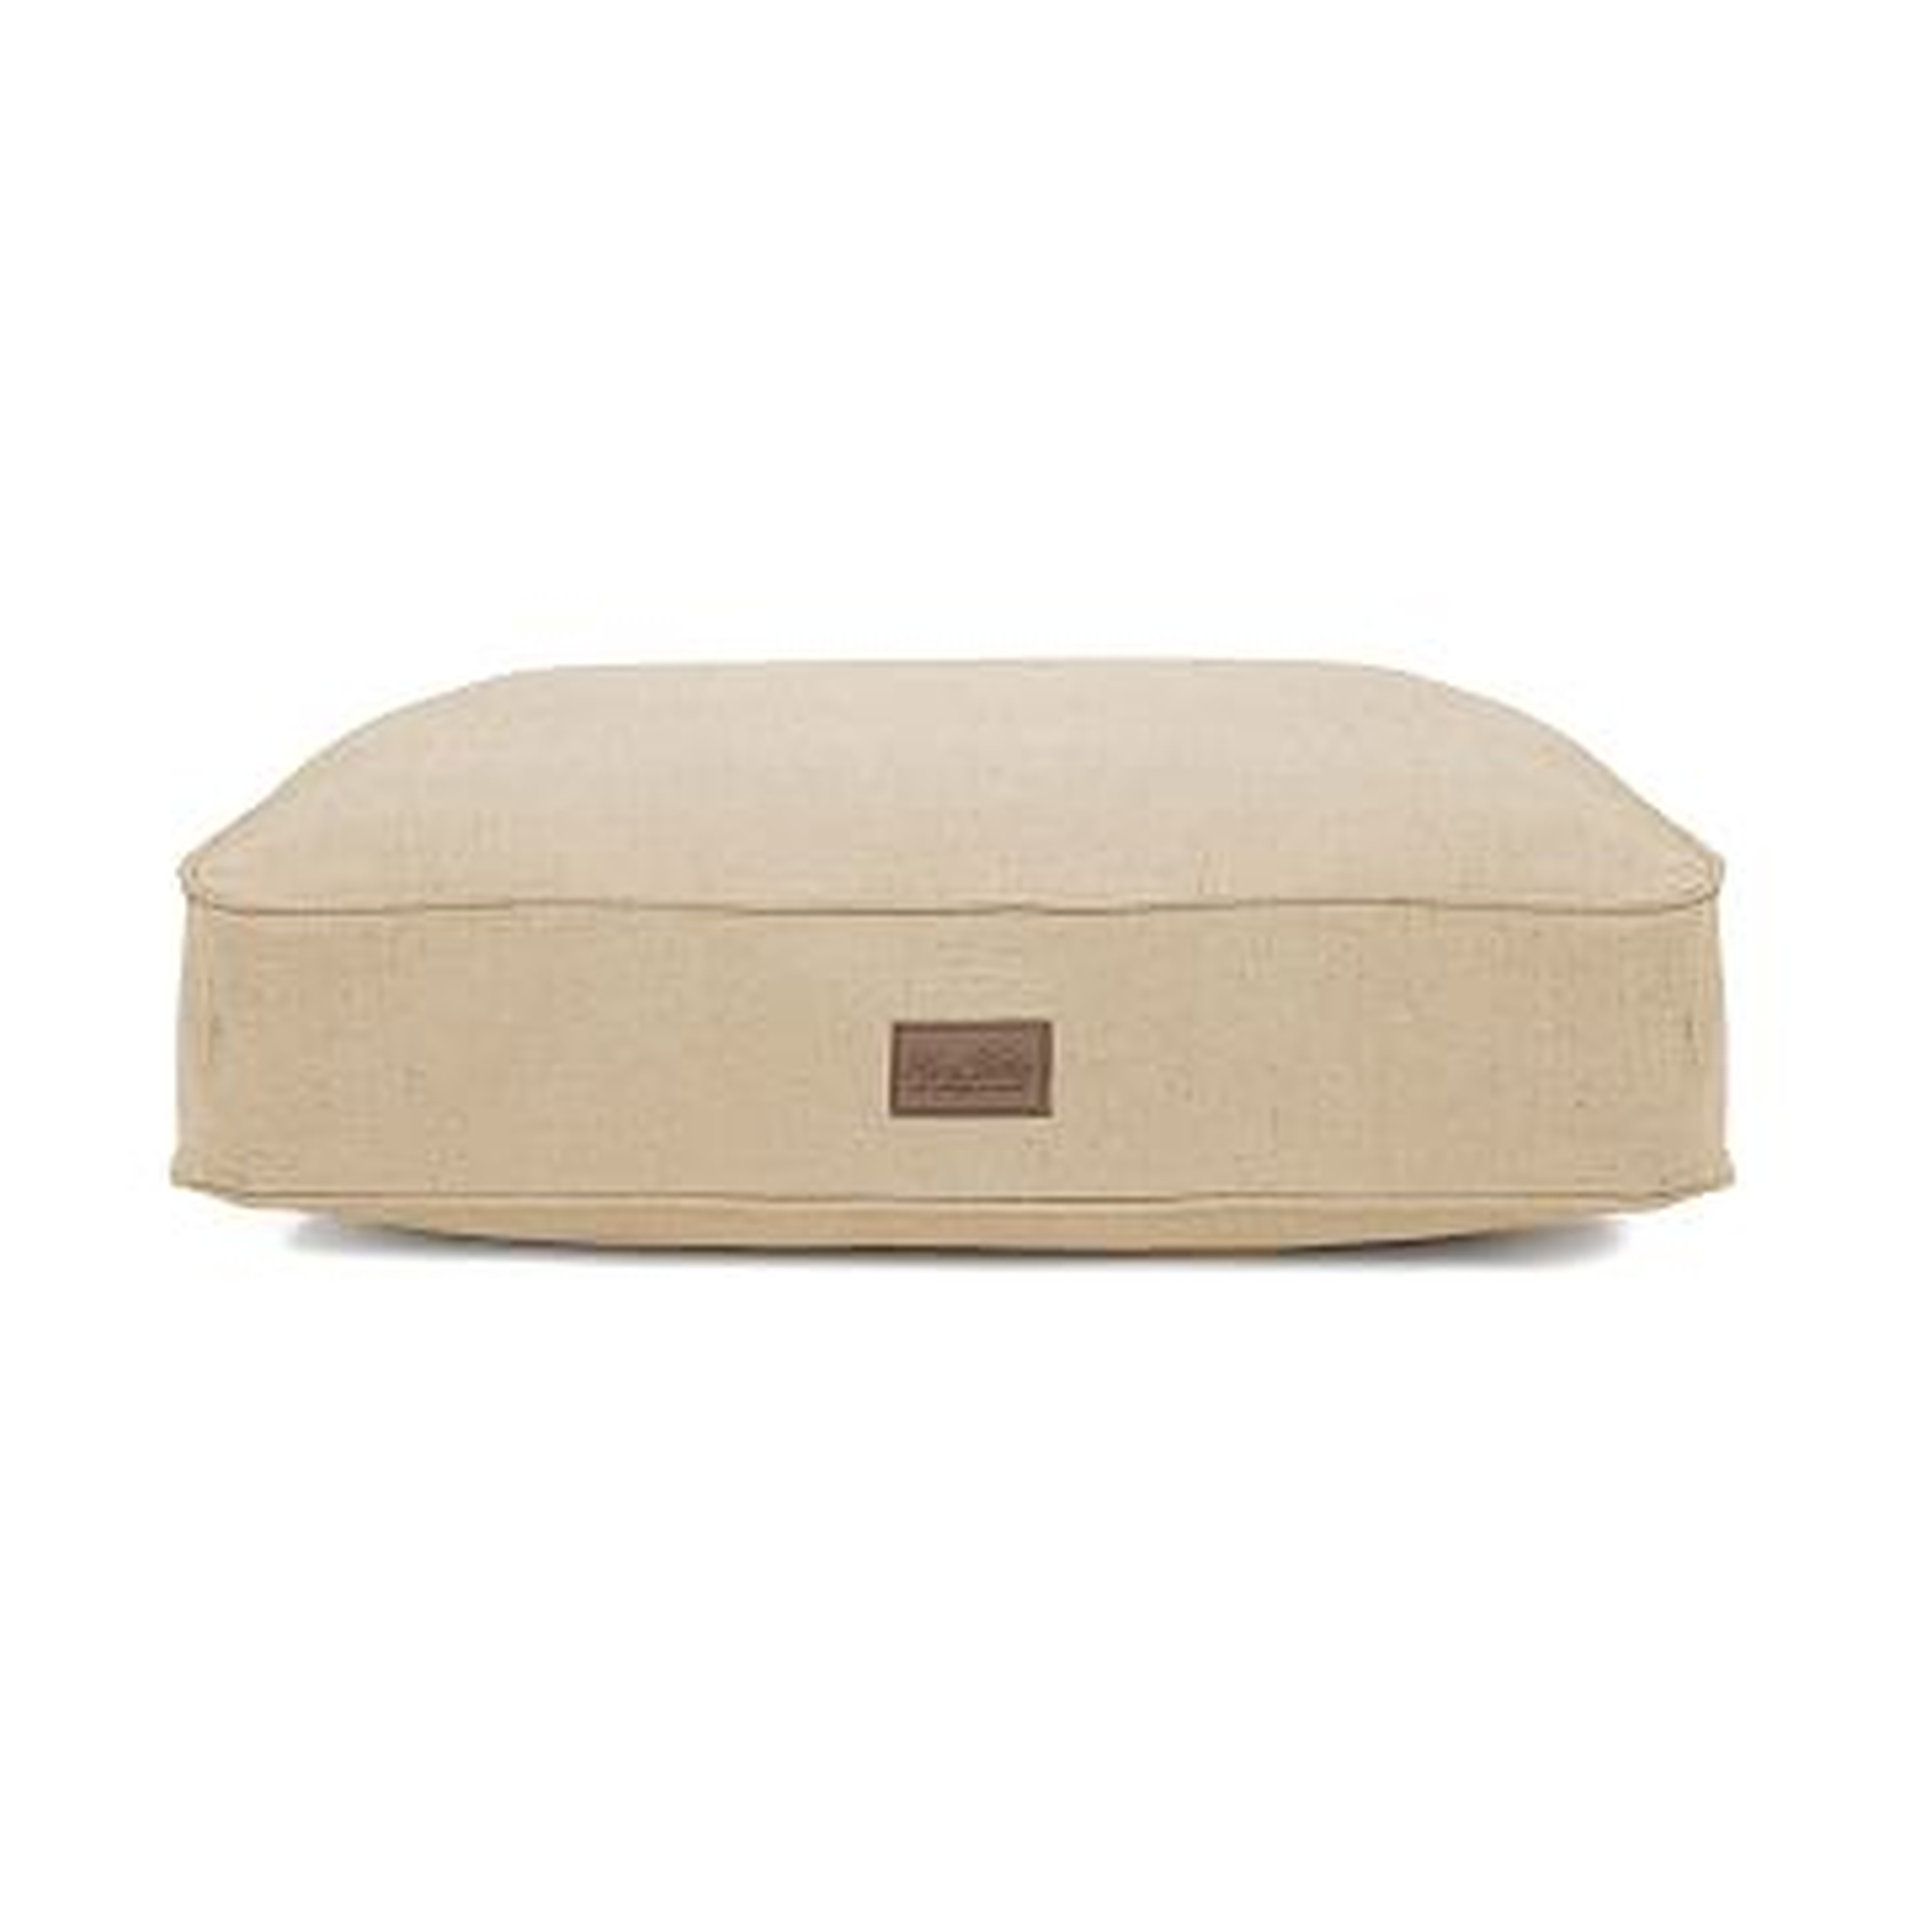 Tweed Rectangle Bed, Cotton Bed Cover, Natural, Medium - West Elm